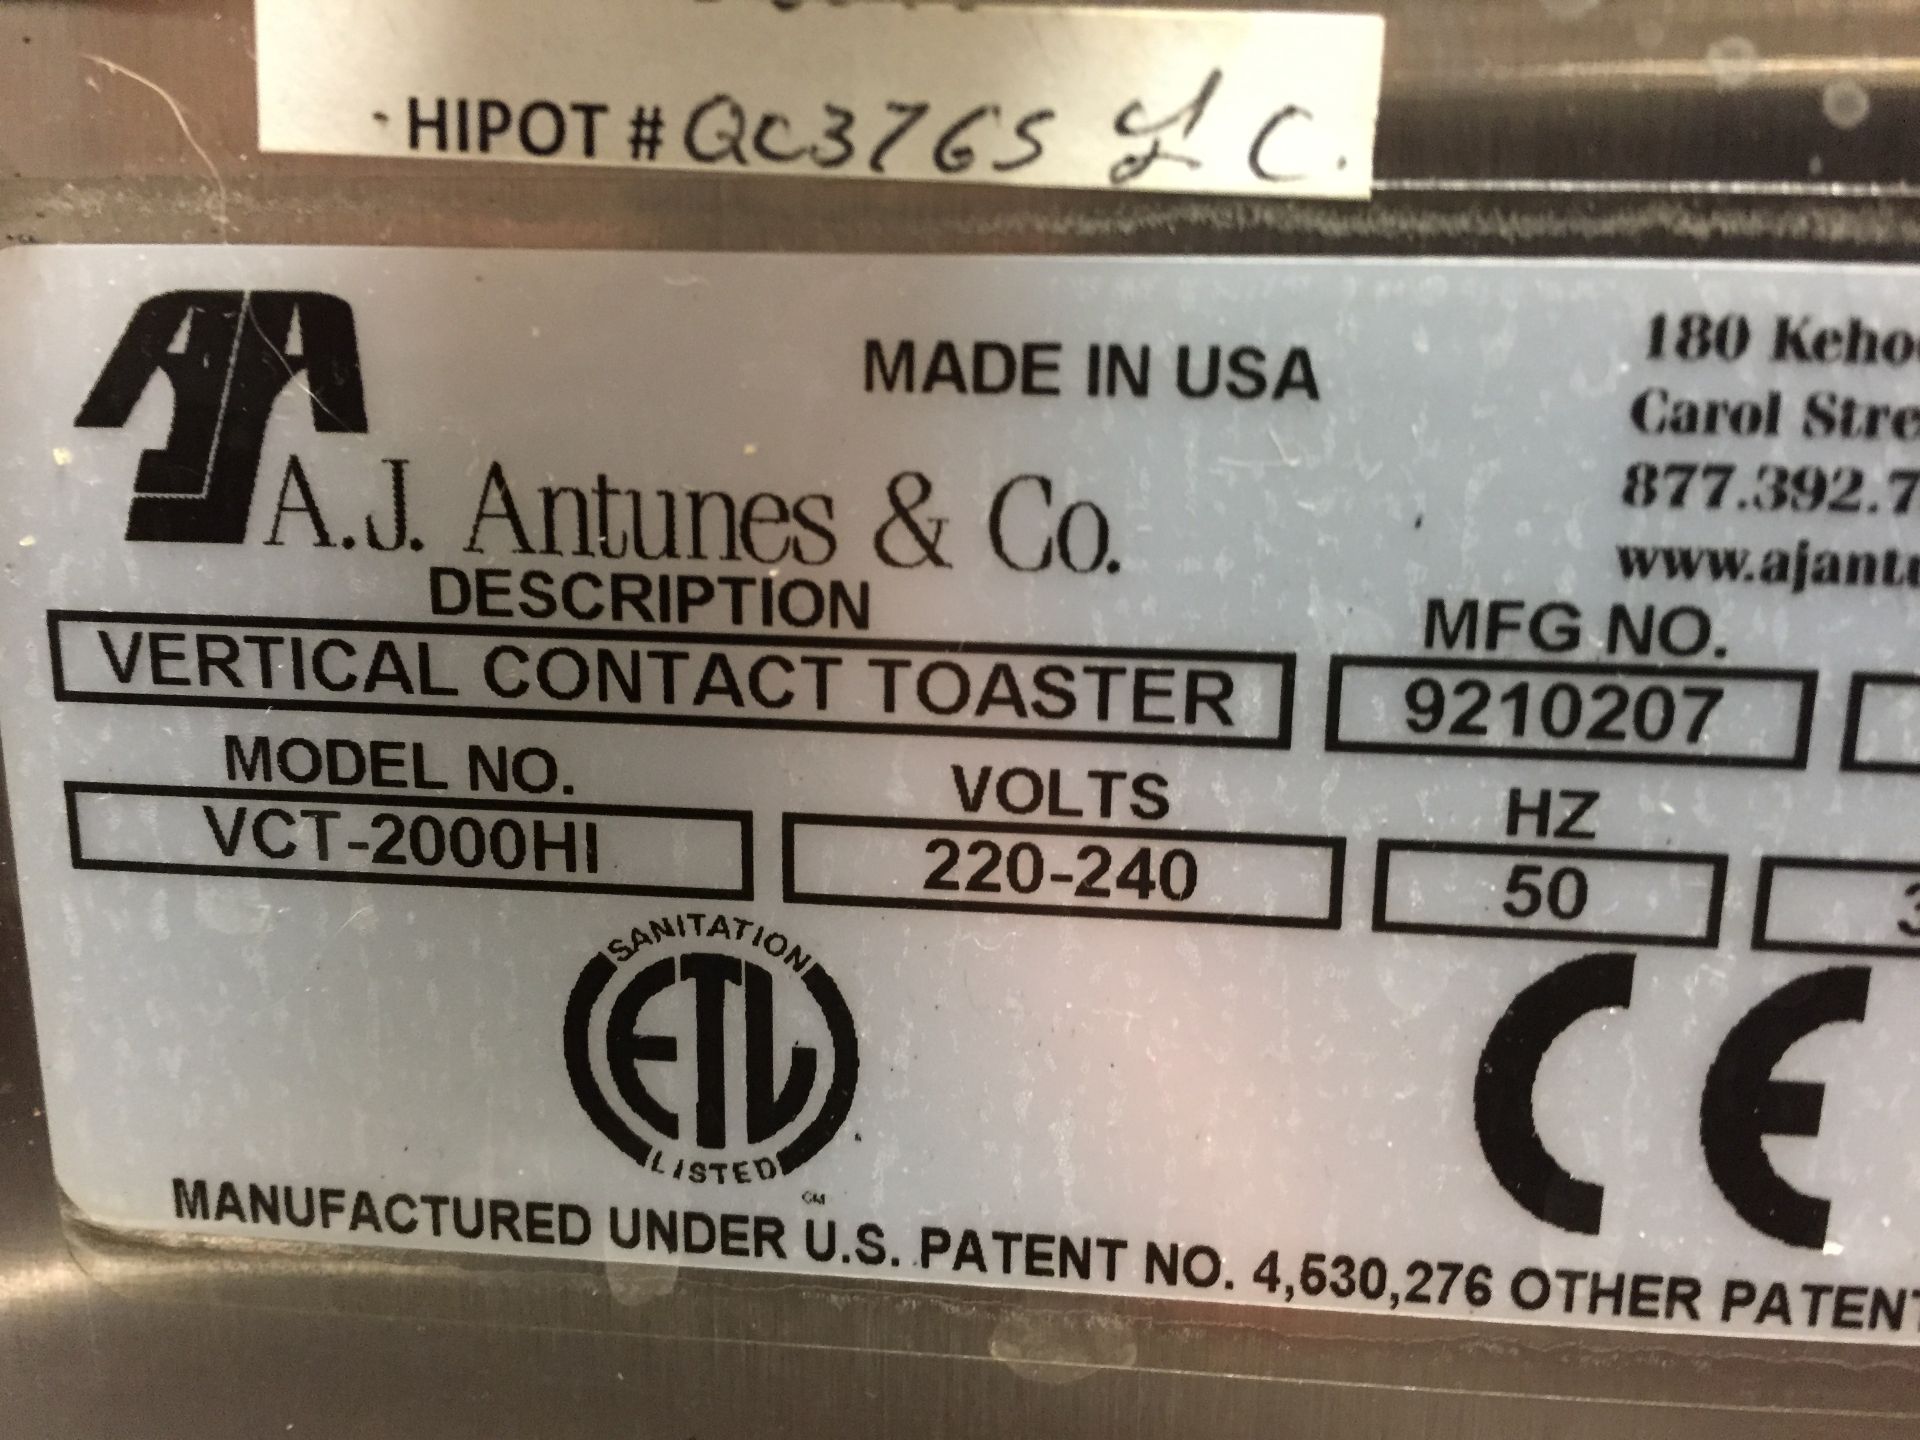 1 x Roundup 9210100 Commercial Stainless Steel Vertical Contact Toaster - Toasts Up To 7000 Slices/ - Image 4 of 4